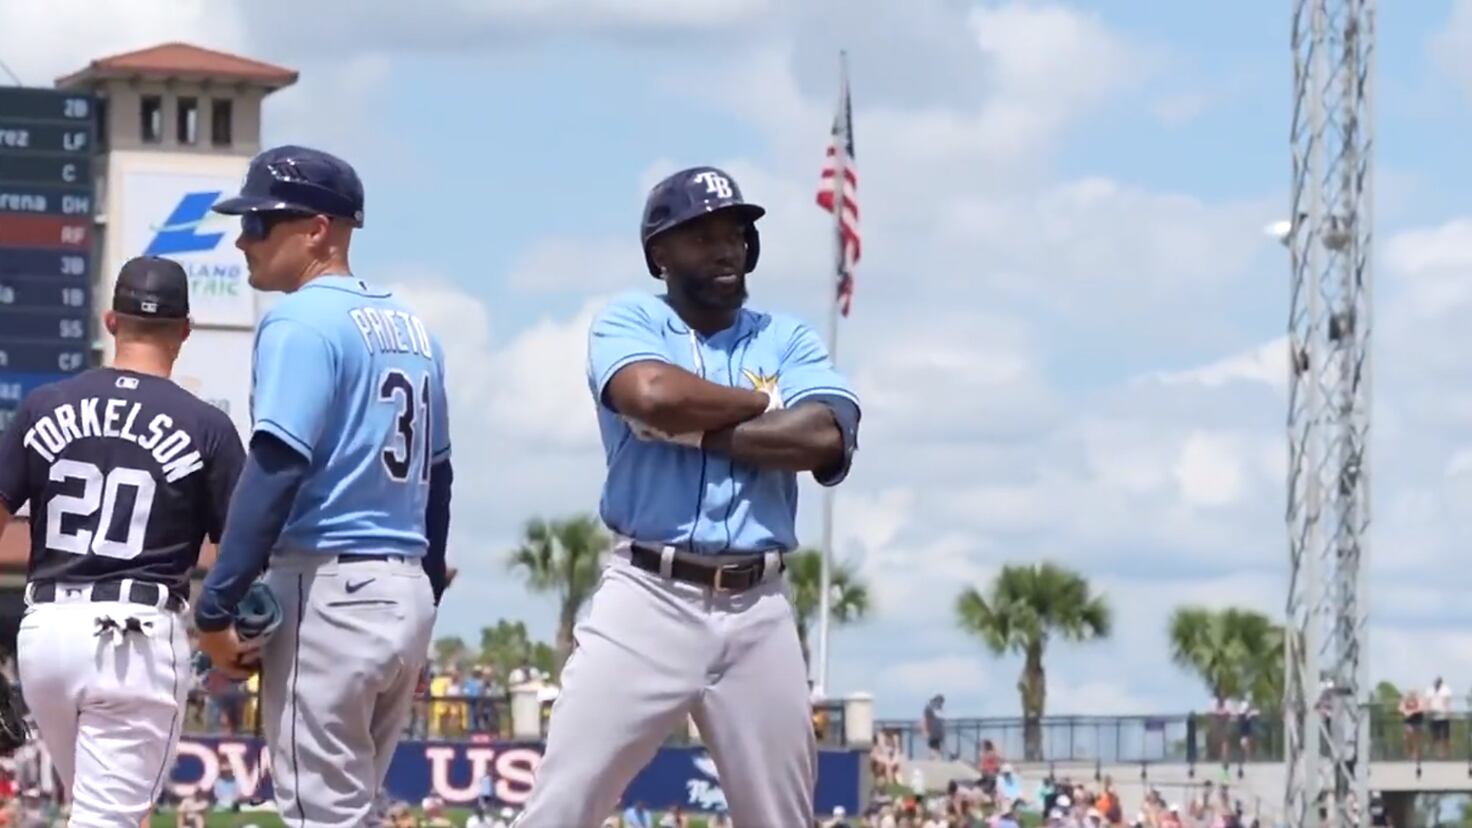 McClanahan sharp, Rays blank Tigers 4-0 on opening day